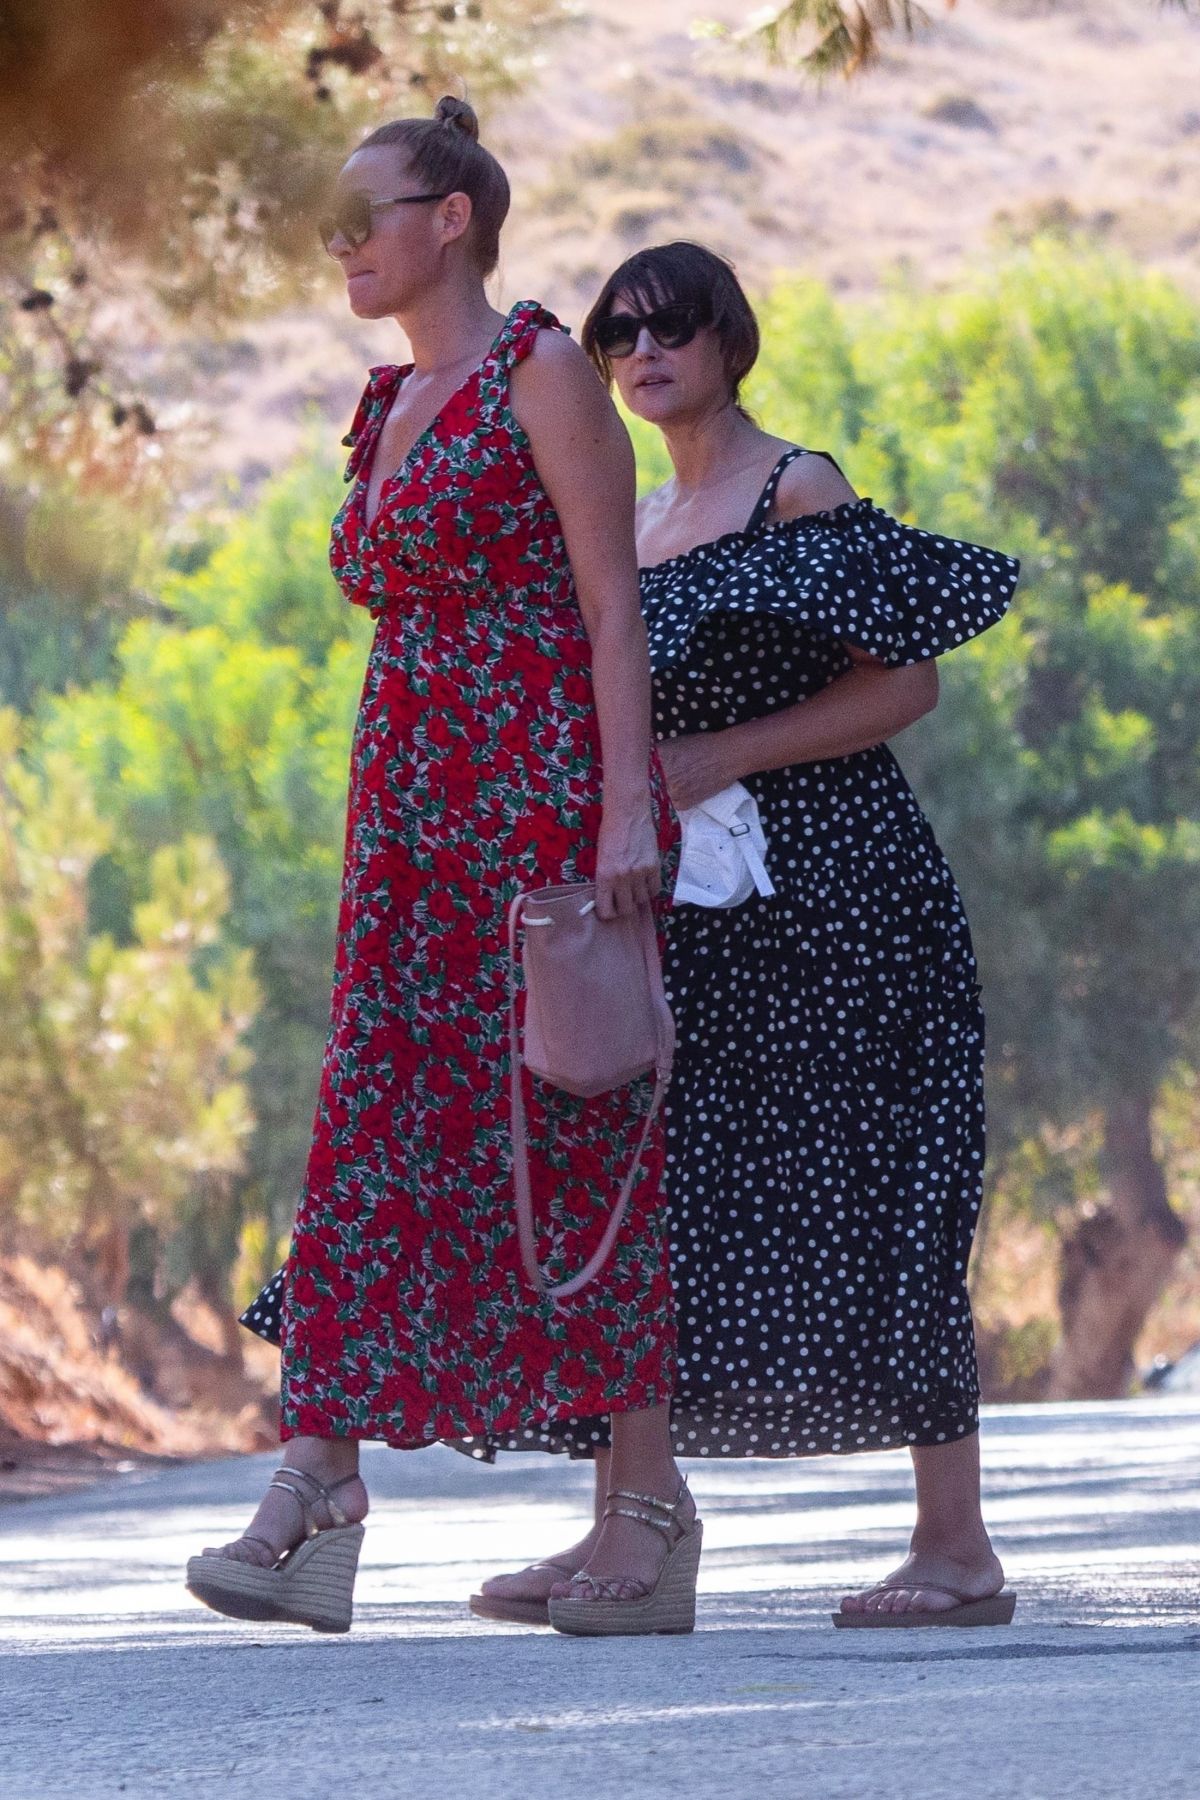 monica-bellucci-out-on-vacation-in-greece-08-03-2020-7.jpg